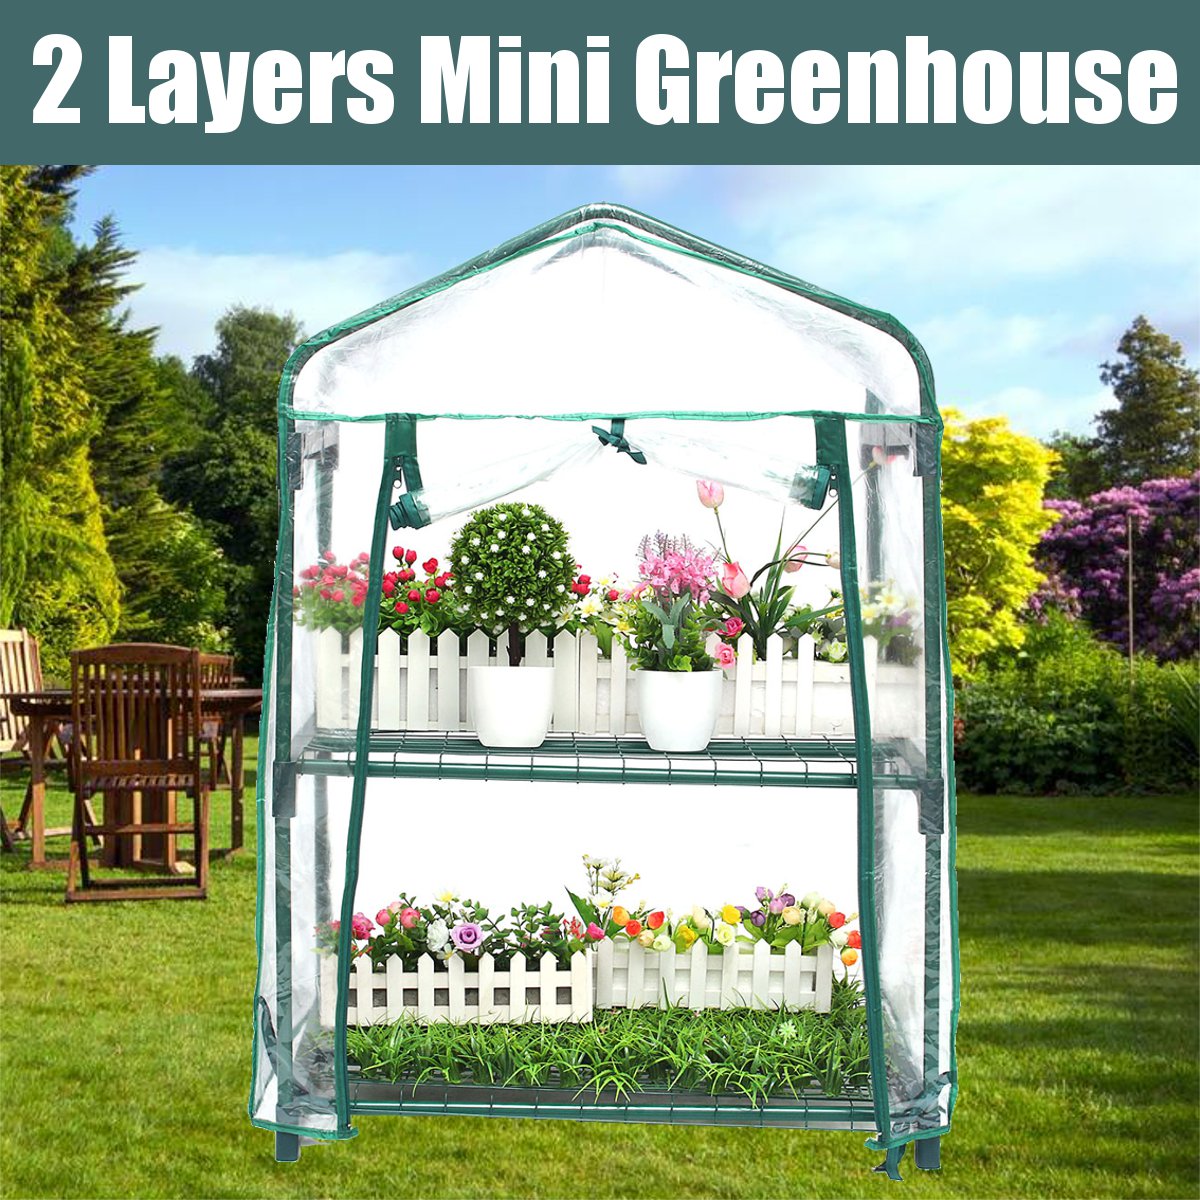 2-Layers-Mini-Greenhouse-Home-Outdoor-Flower-Plant-Pot-Gardening-Winter-Shelves-1577618-10